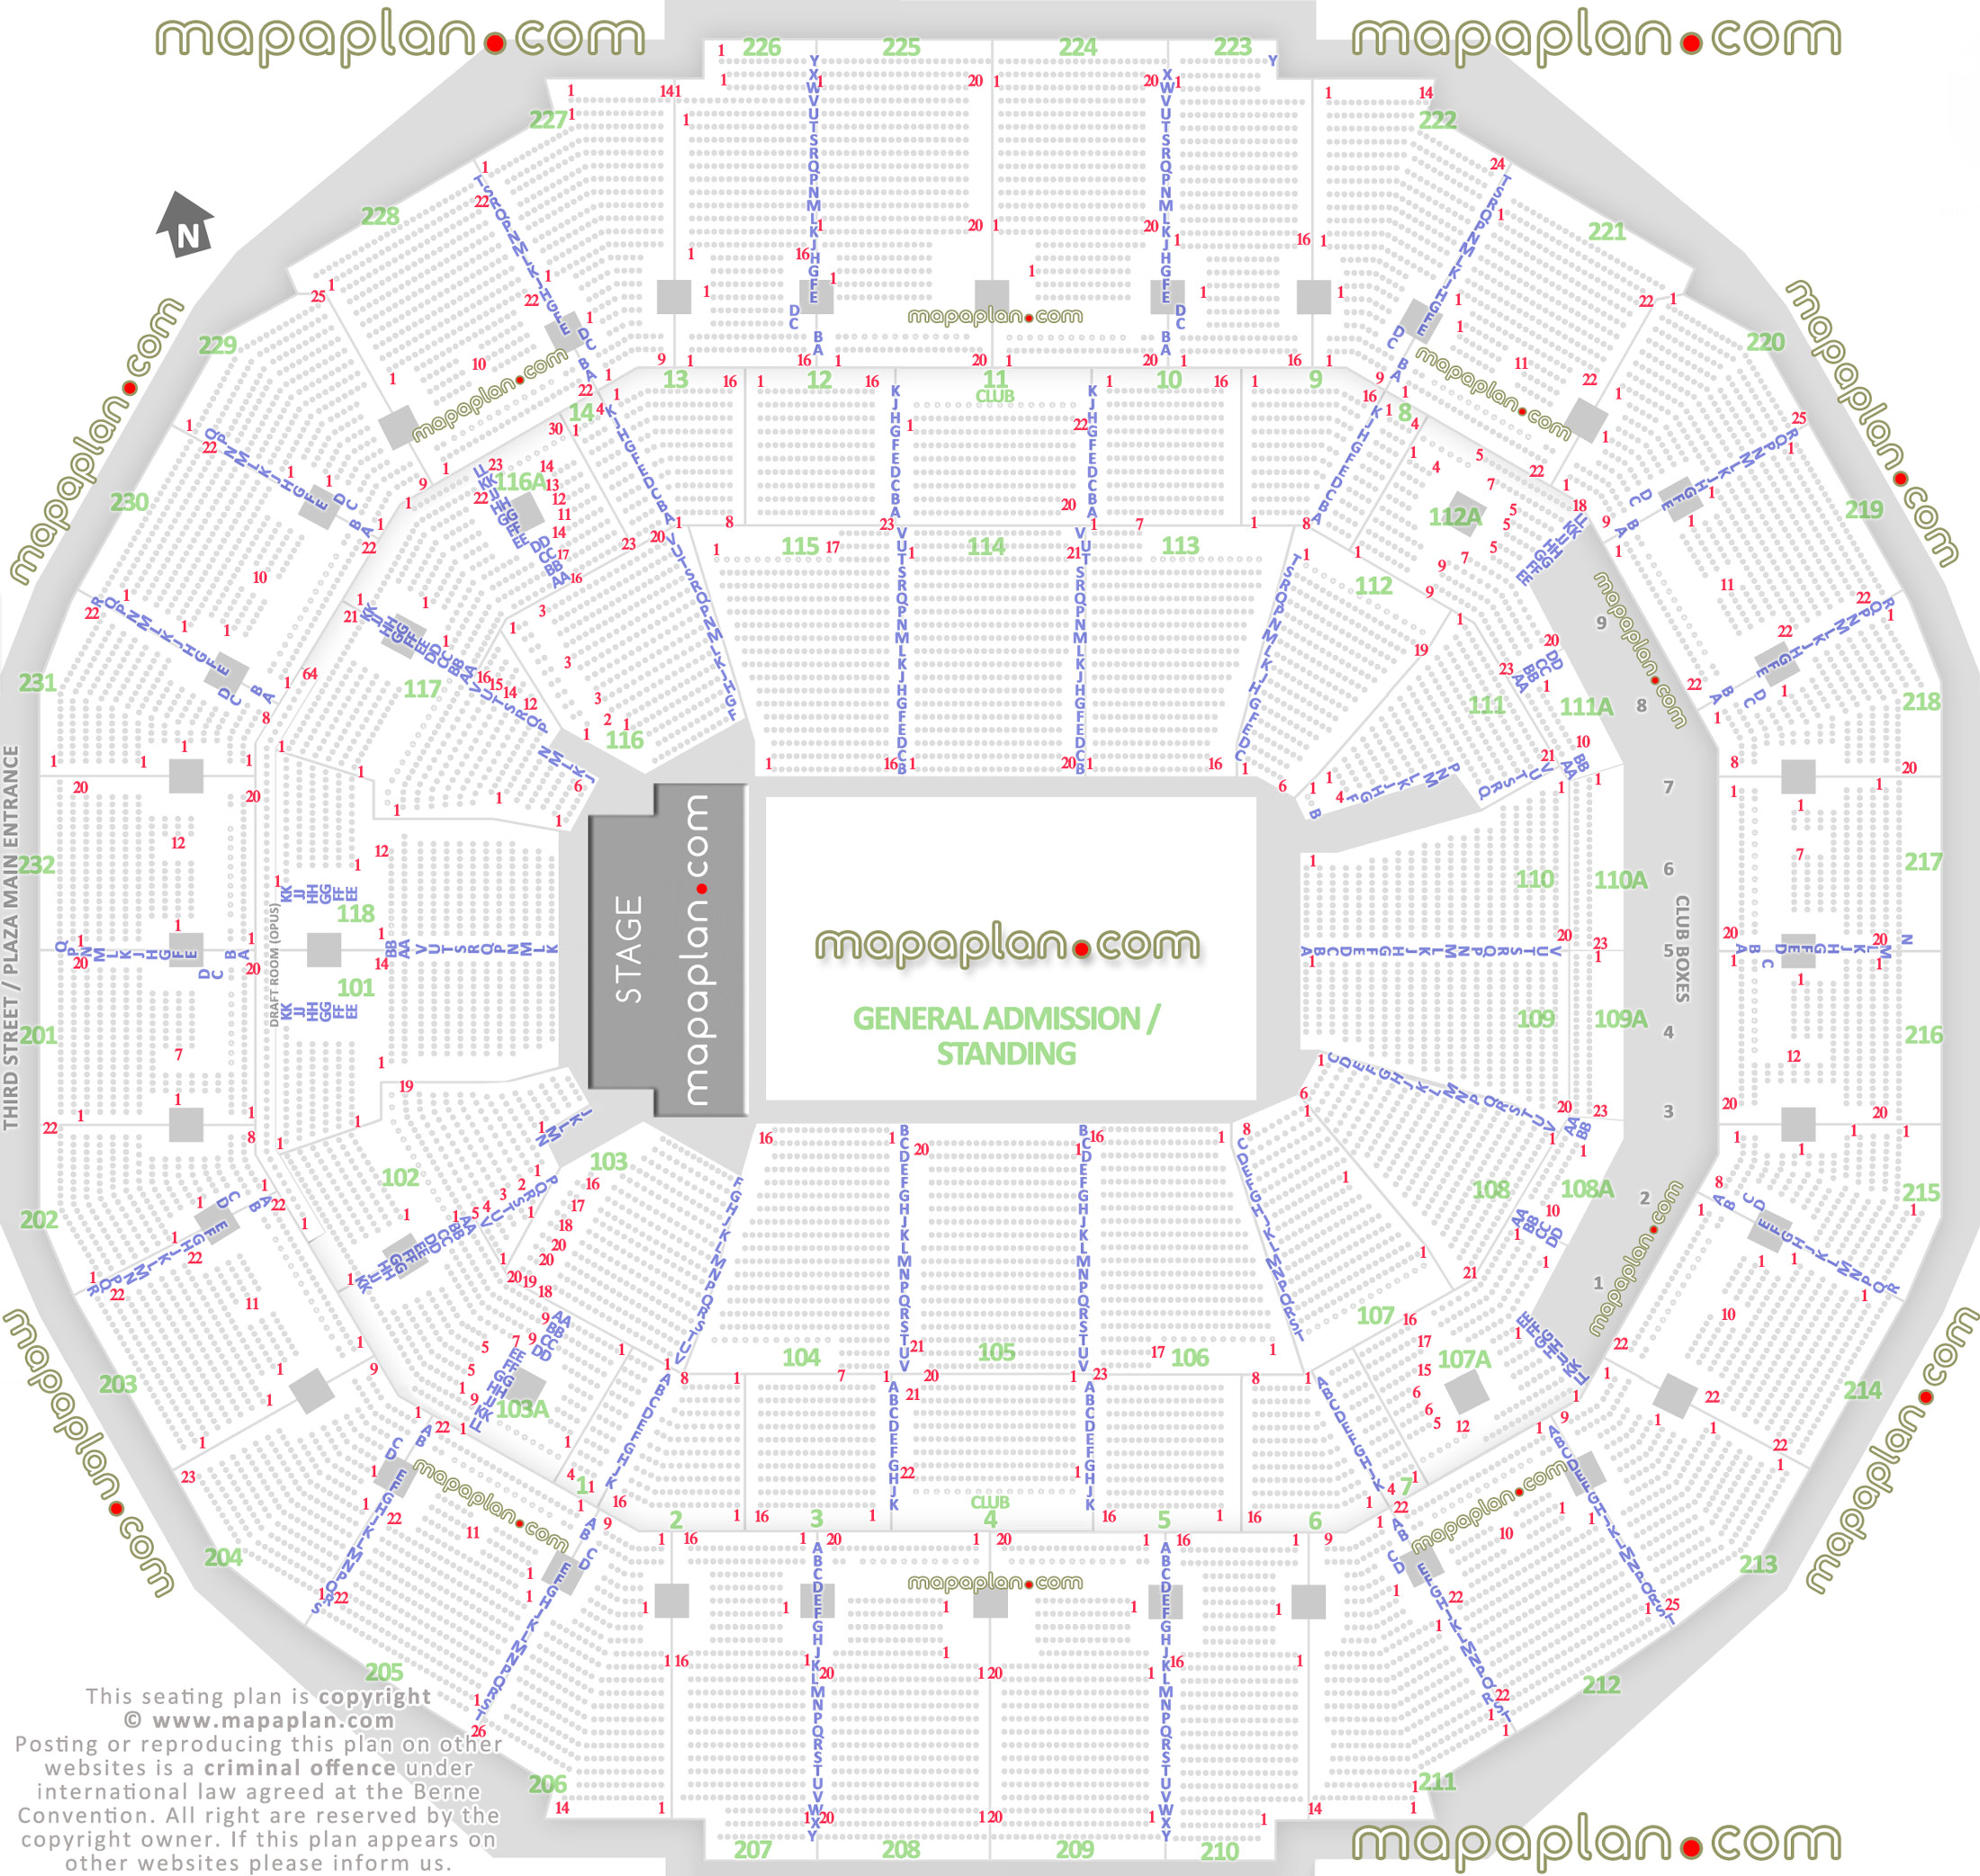 general admission ga floor standing concert capacity plan fedex forum centre tn concert stage floor pit plan sections best seat selection information guide virtual interactive image map rows a b c d e f g h j k l m n p q r s t u v w x y Memphis FedExForum seating chart